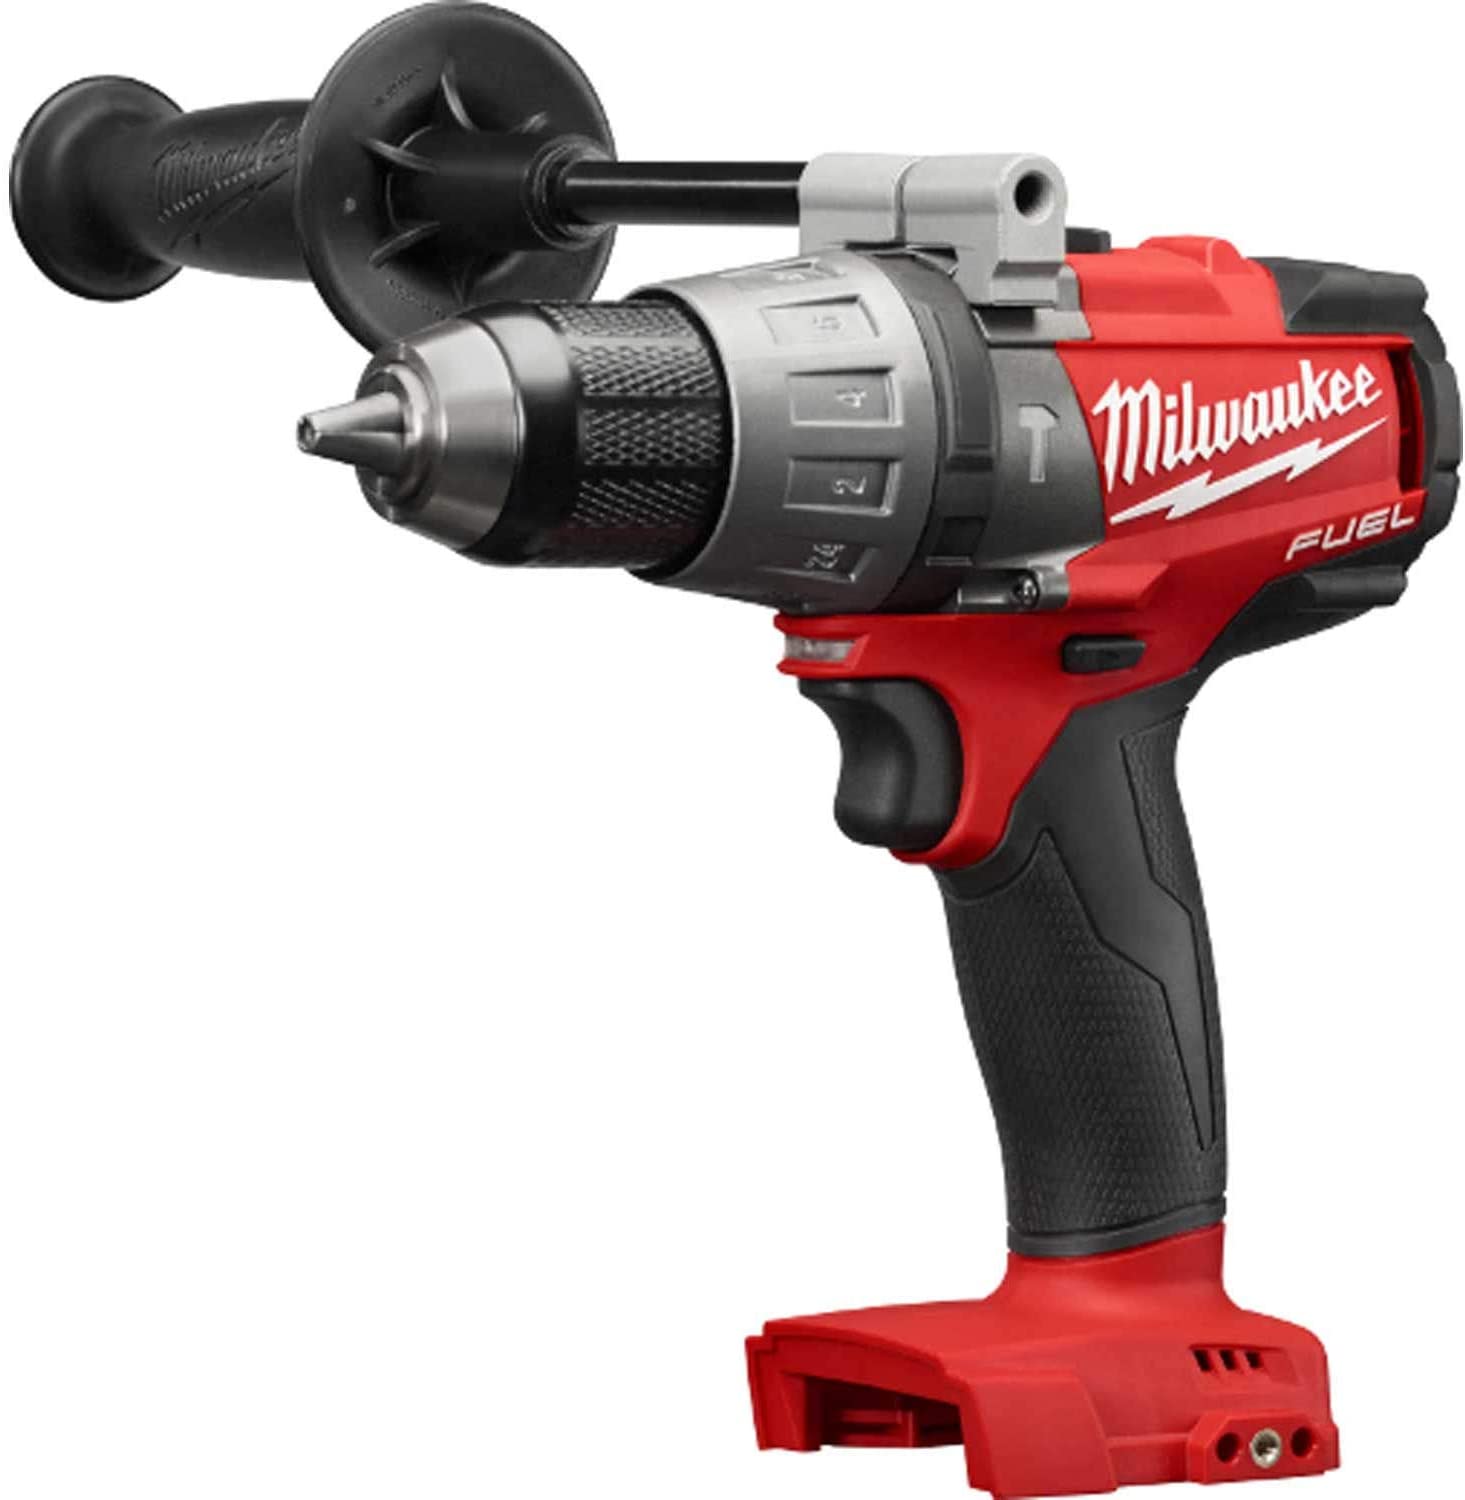 The Best Cordless Drills in 2022 